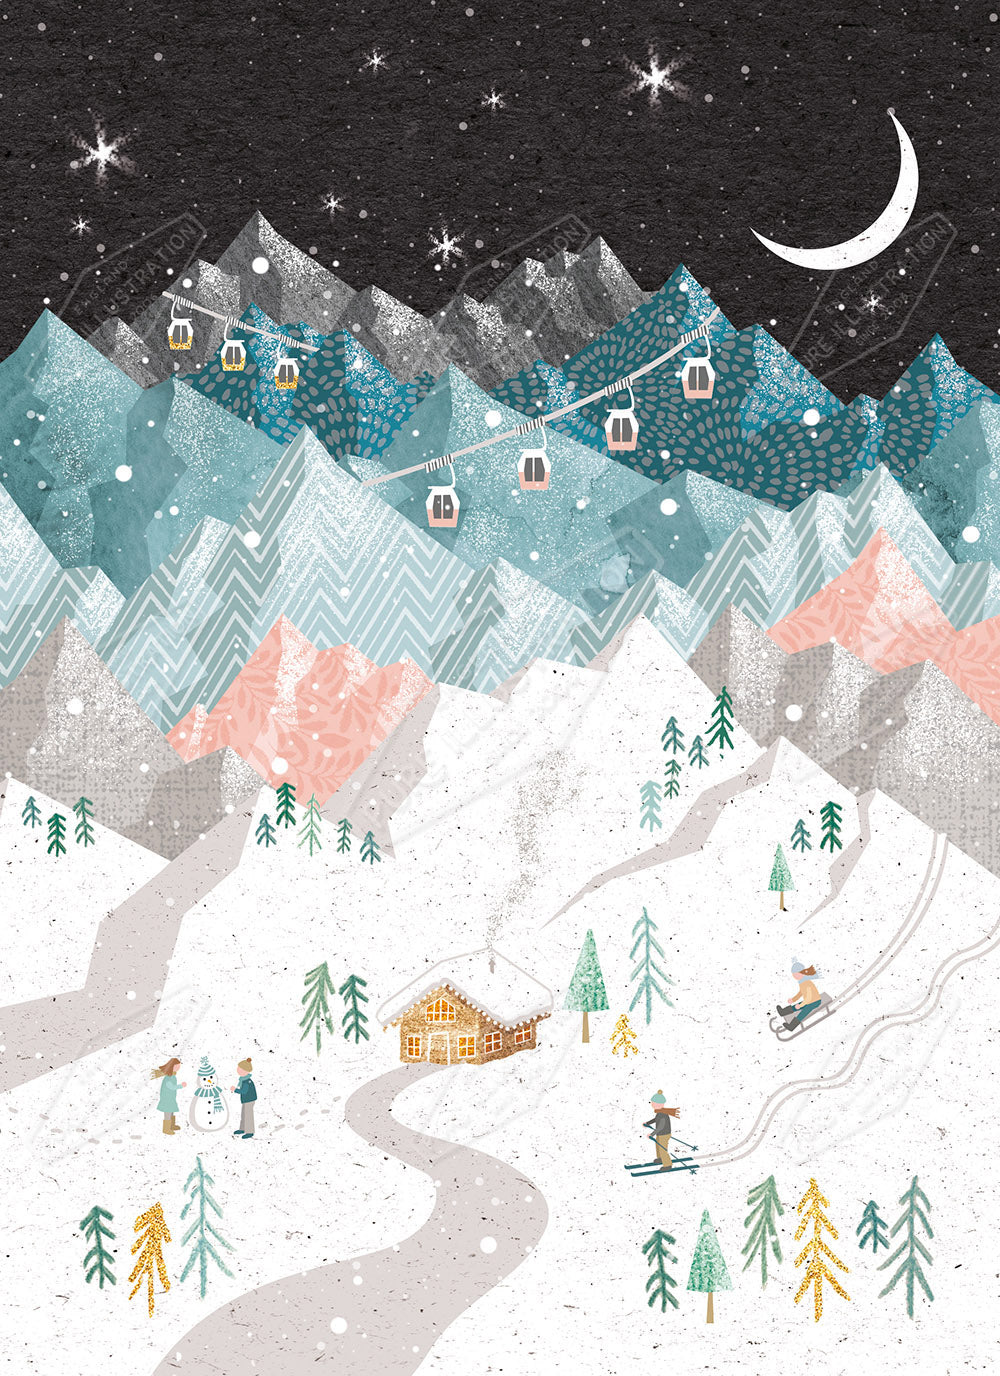 Mystical Christmas Ski Lodge by Victoria Marks for Pure art Licensing Agency & Surface Design Studio